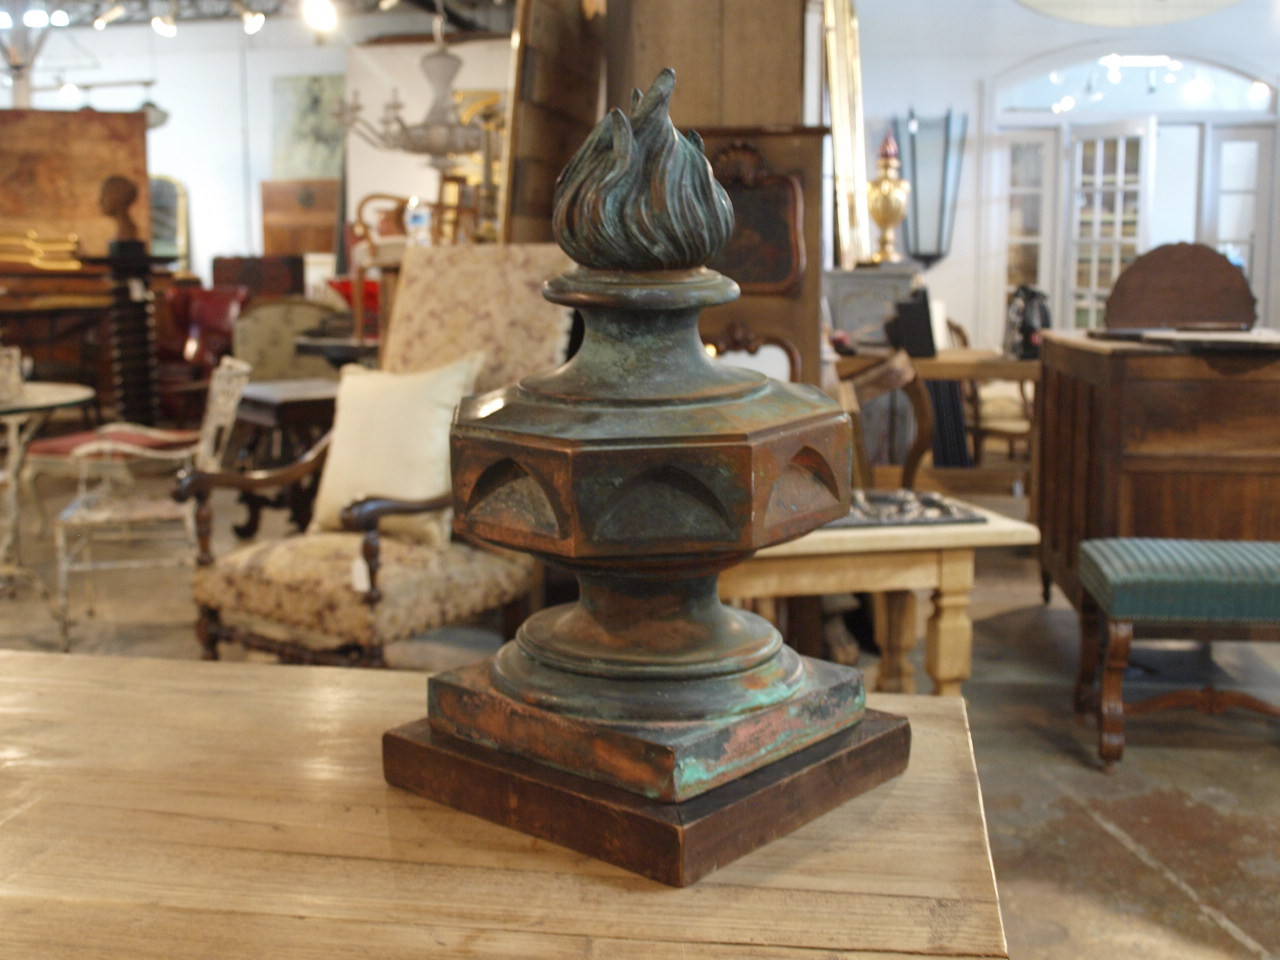 A beautiful 19th century French architectural flame finial salvaged from a building in central France. The finial now rests on its antique wooden base. The finial is beautifully constructed and the copper has a very rich patina. The flame finial is